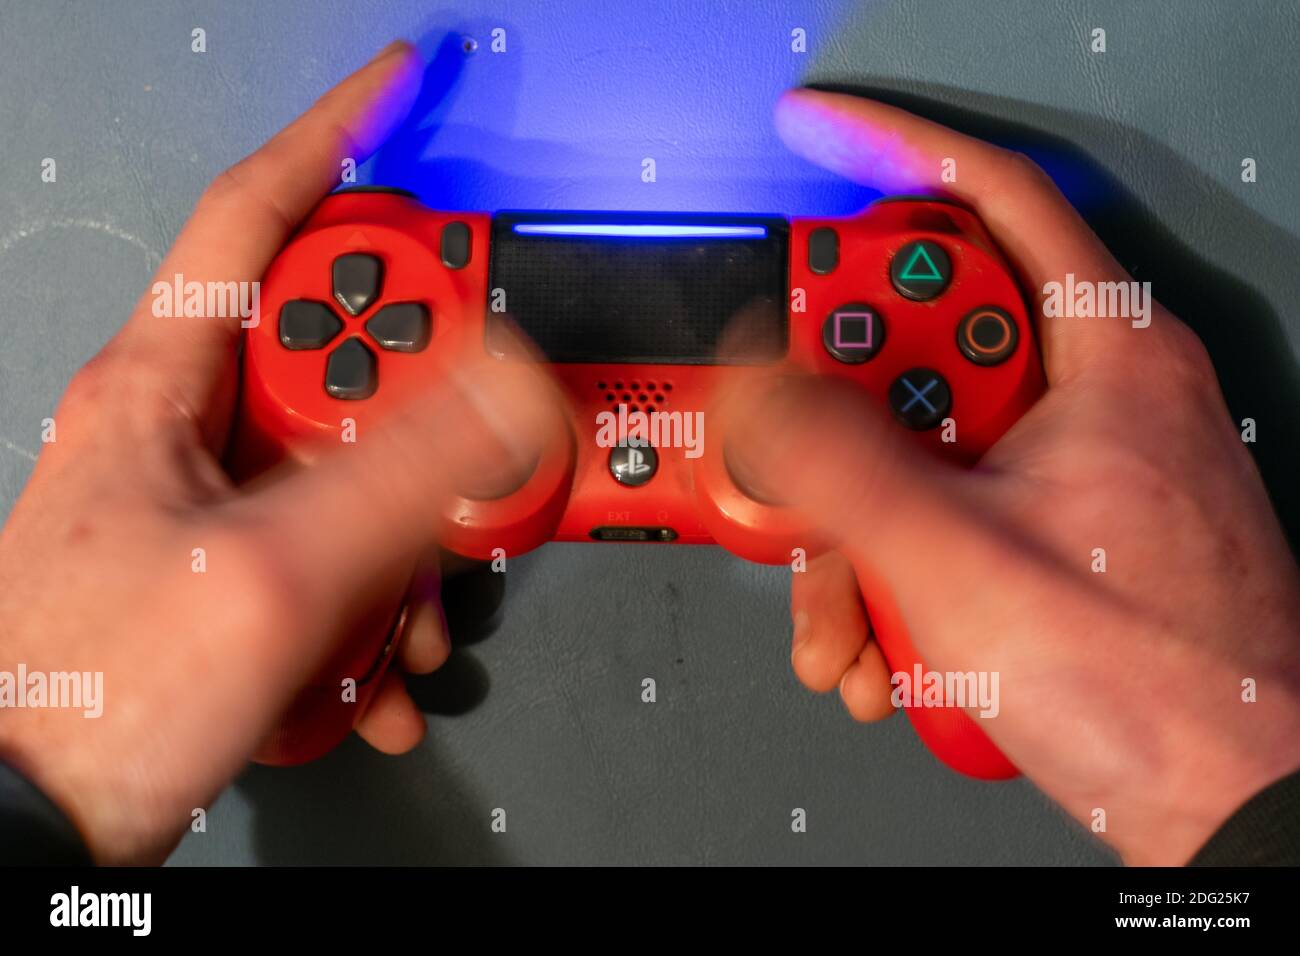 December 5, 2020 - Elkins Park, Pennsylvania: A Red PS4 Controller With  Motion Blur Over the Thumbsticks Showing the Controller Being Used Stock  Photo - Alamy